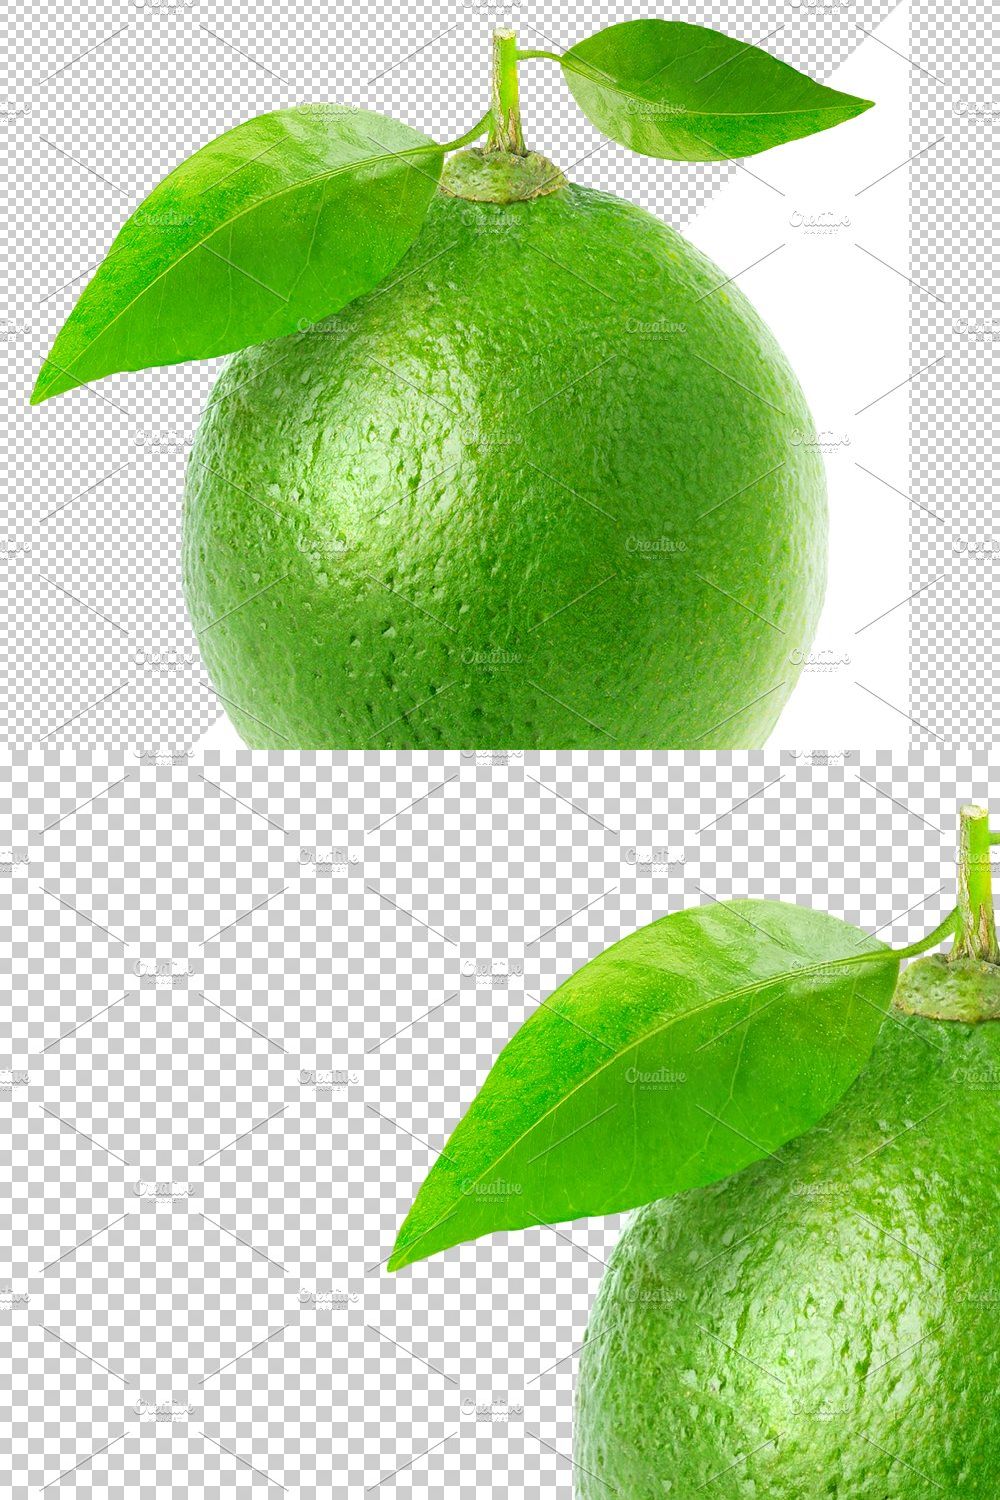 Lime fruit and juice pinterest preview image.